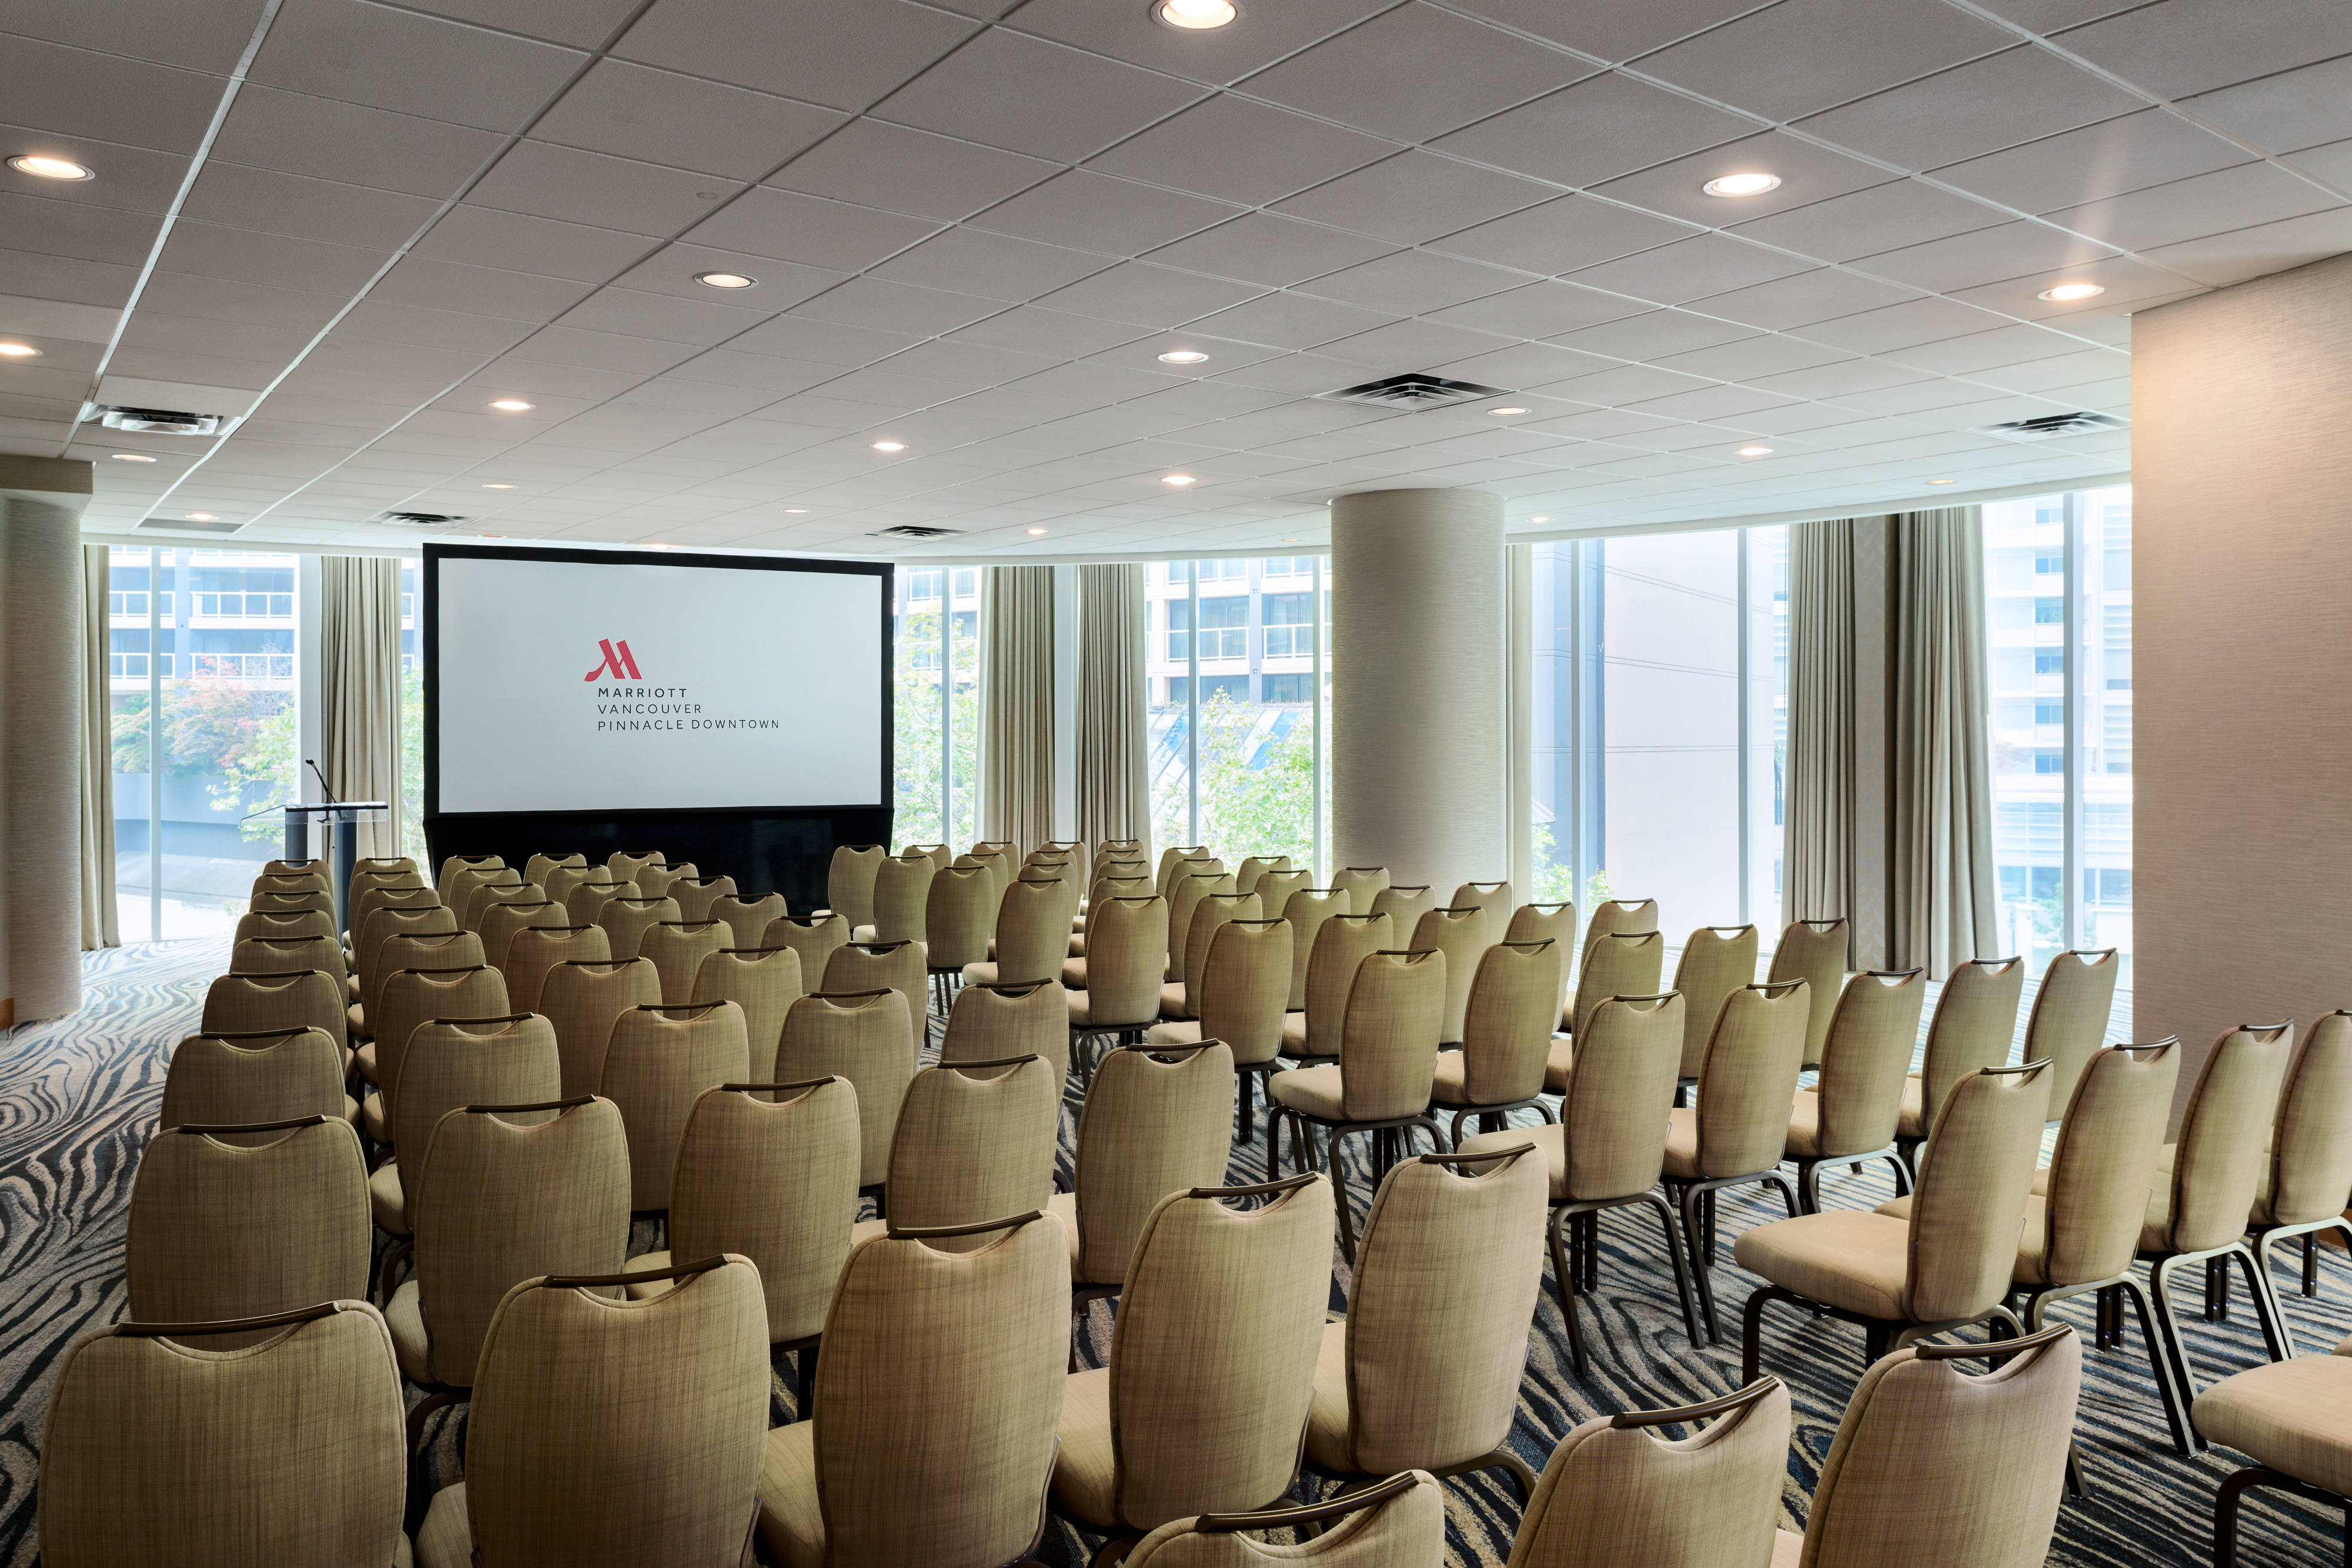 Chairs arranged in rows before a projector screen in a sunny, large meeting room.